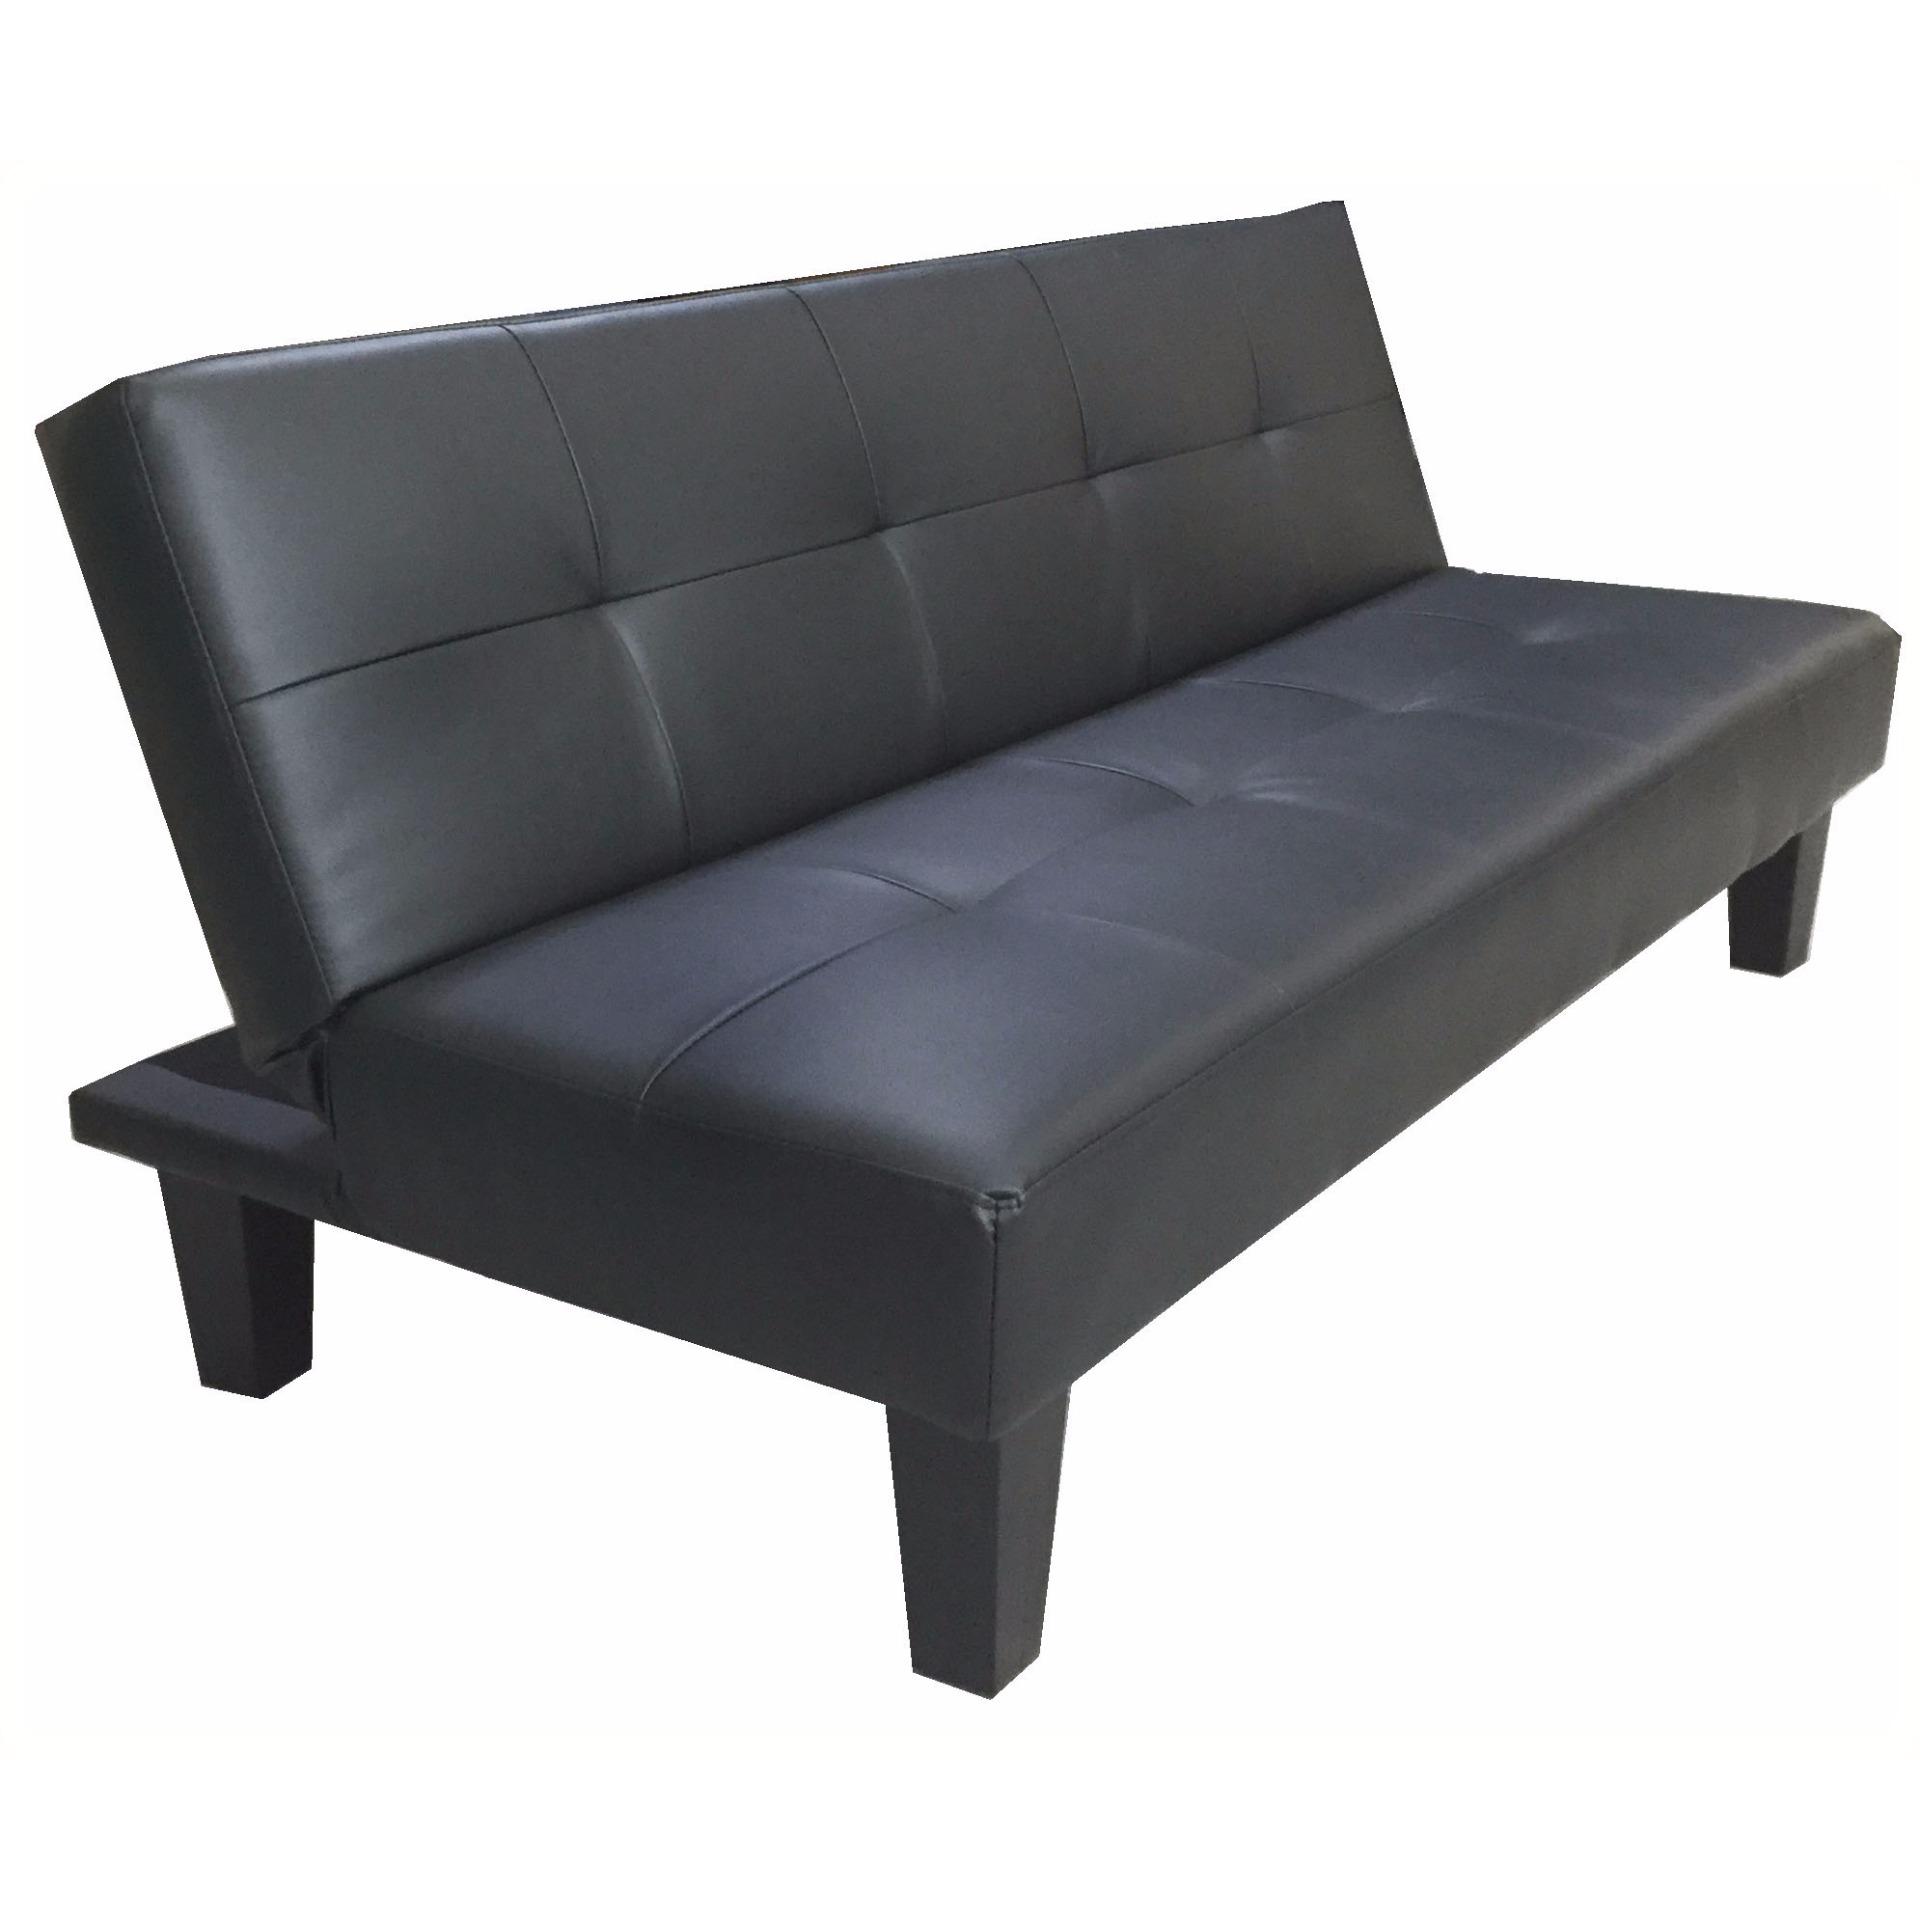 Sofas For Sale Home Sofa Prices Brands Review In Philippines